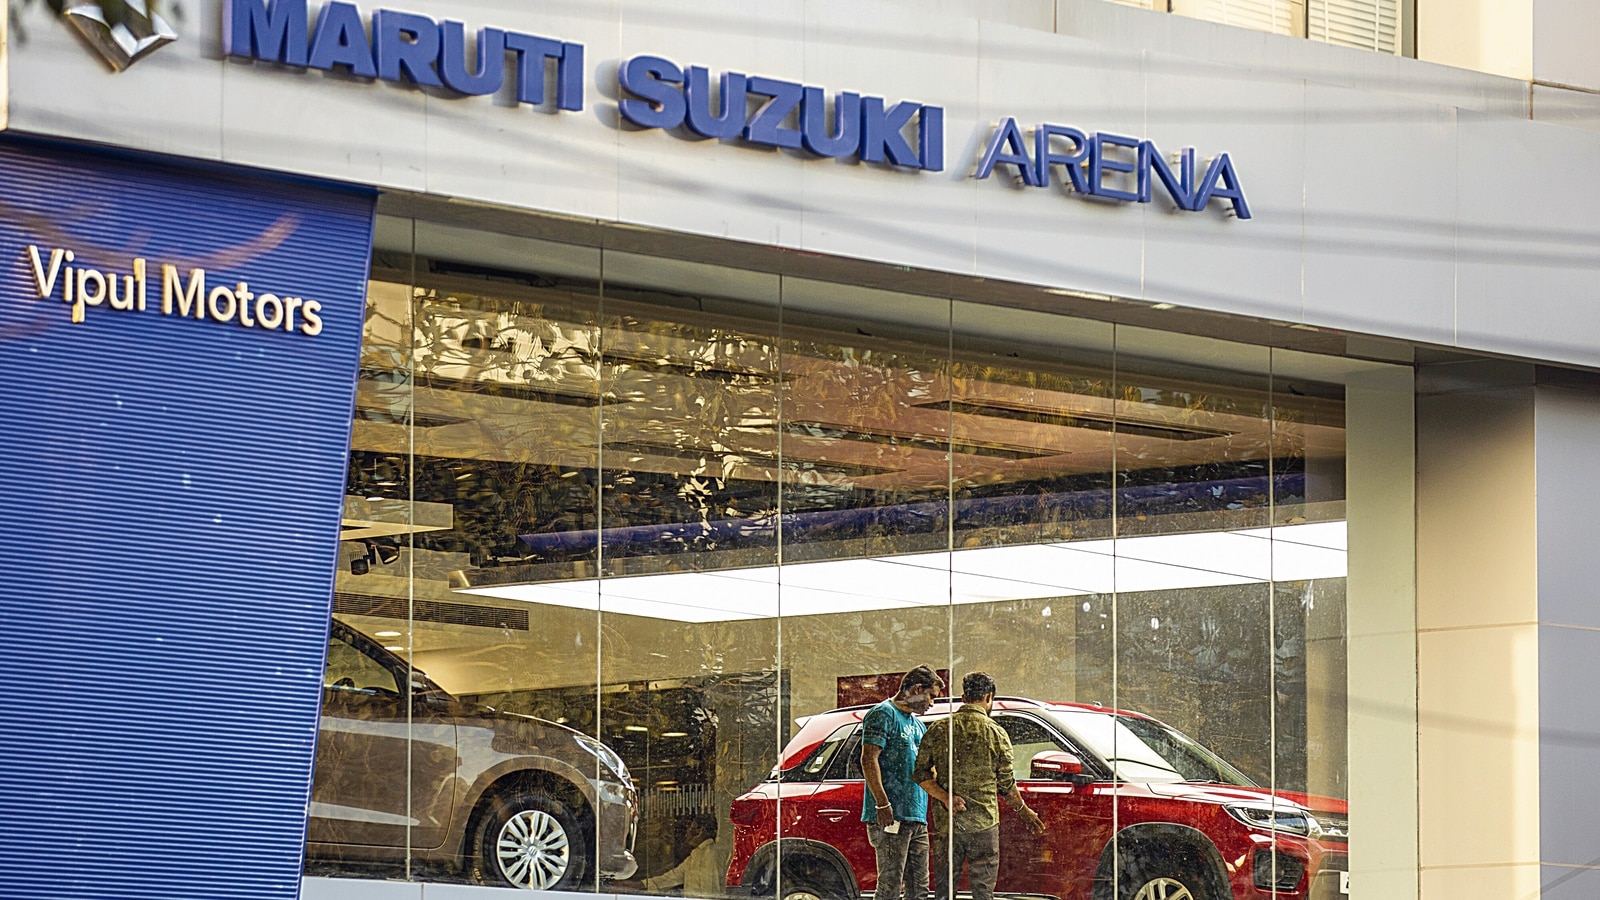 Maruti Suzuki to up production from May - 1cc54a16 9D2e 11eb Be65 85052eb7e245 1619487554427 1619487588189